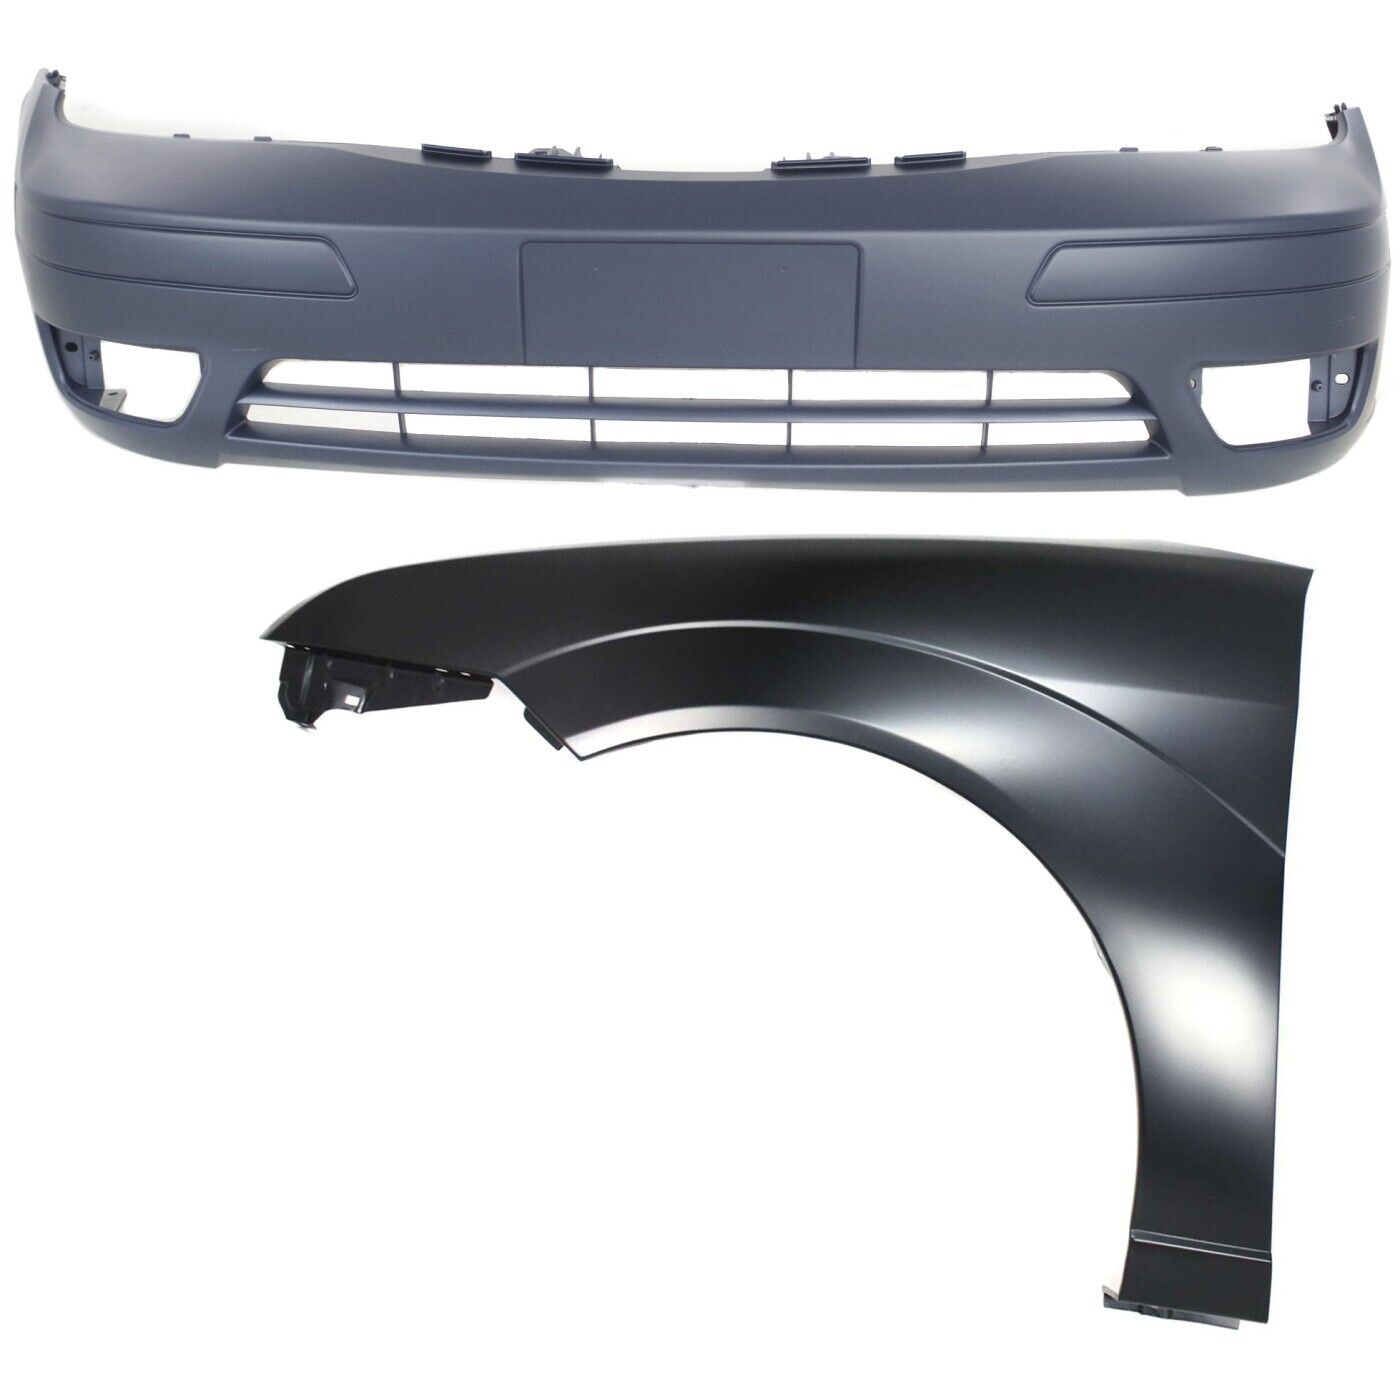 Bumper Cover Fascia Kit Front for Ford Focus 2005-2007